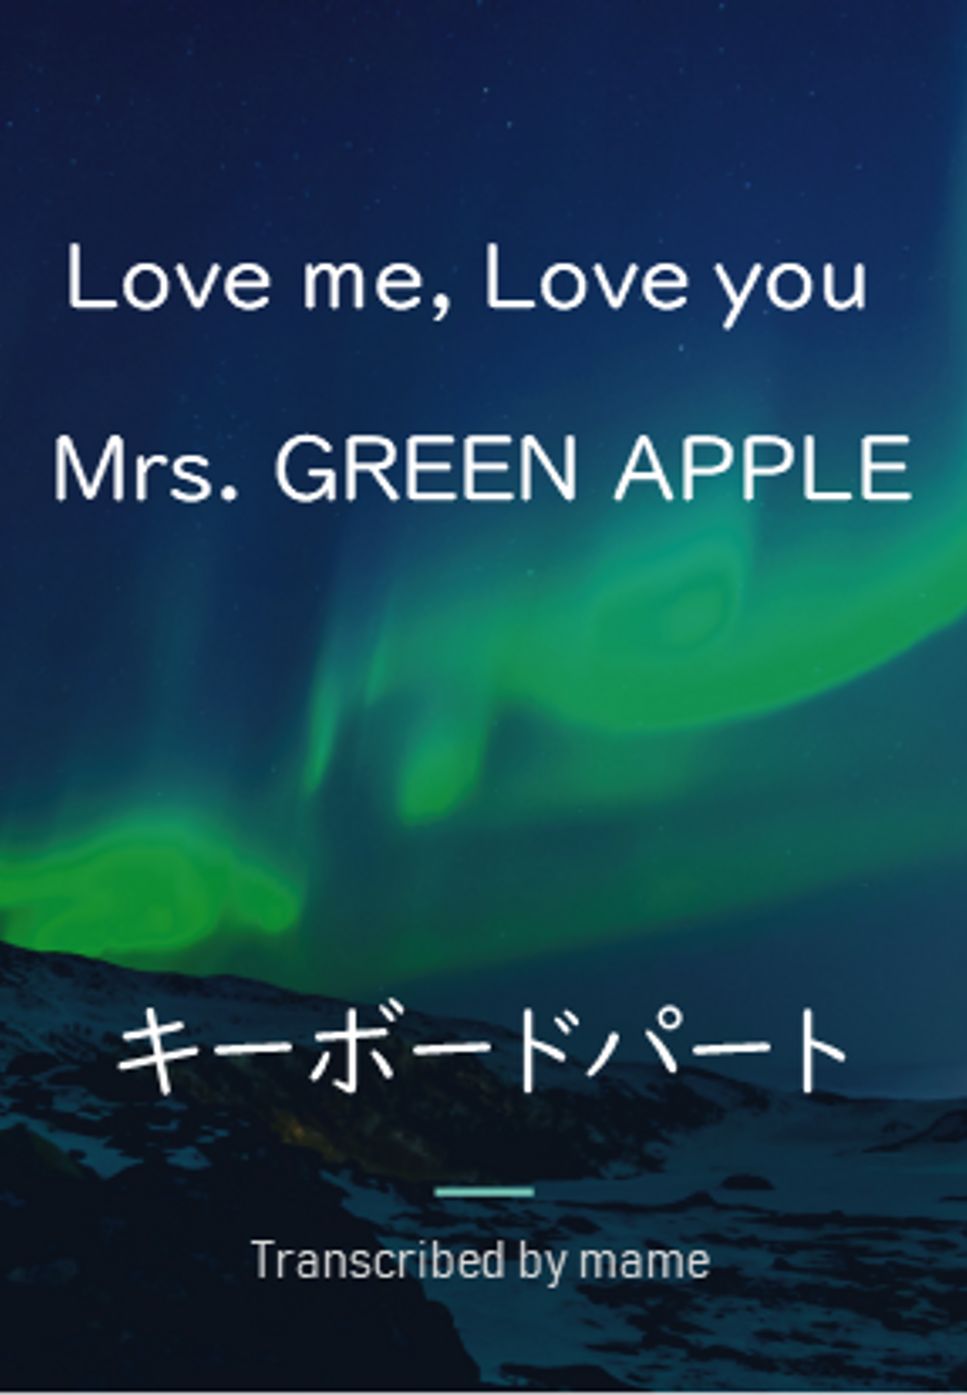 Mrs. GREEN APPLE - Love me, Love you (keyboard part) by mame